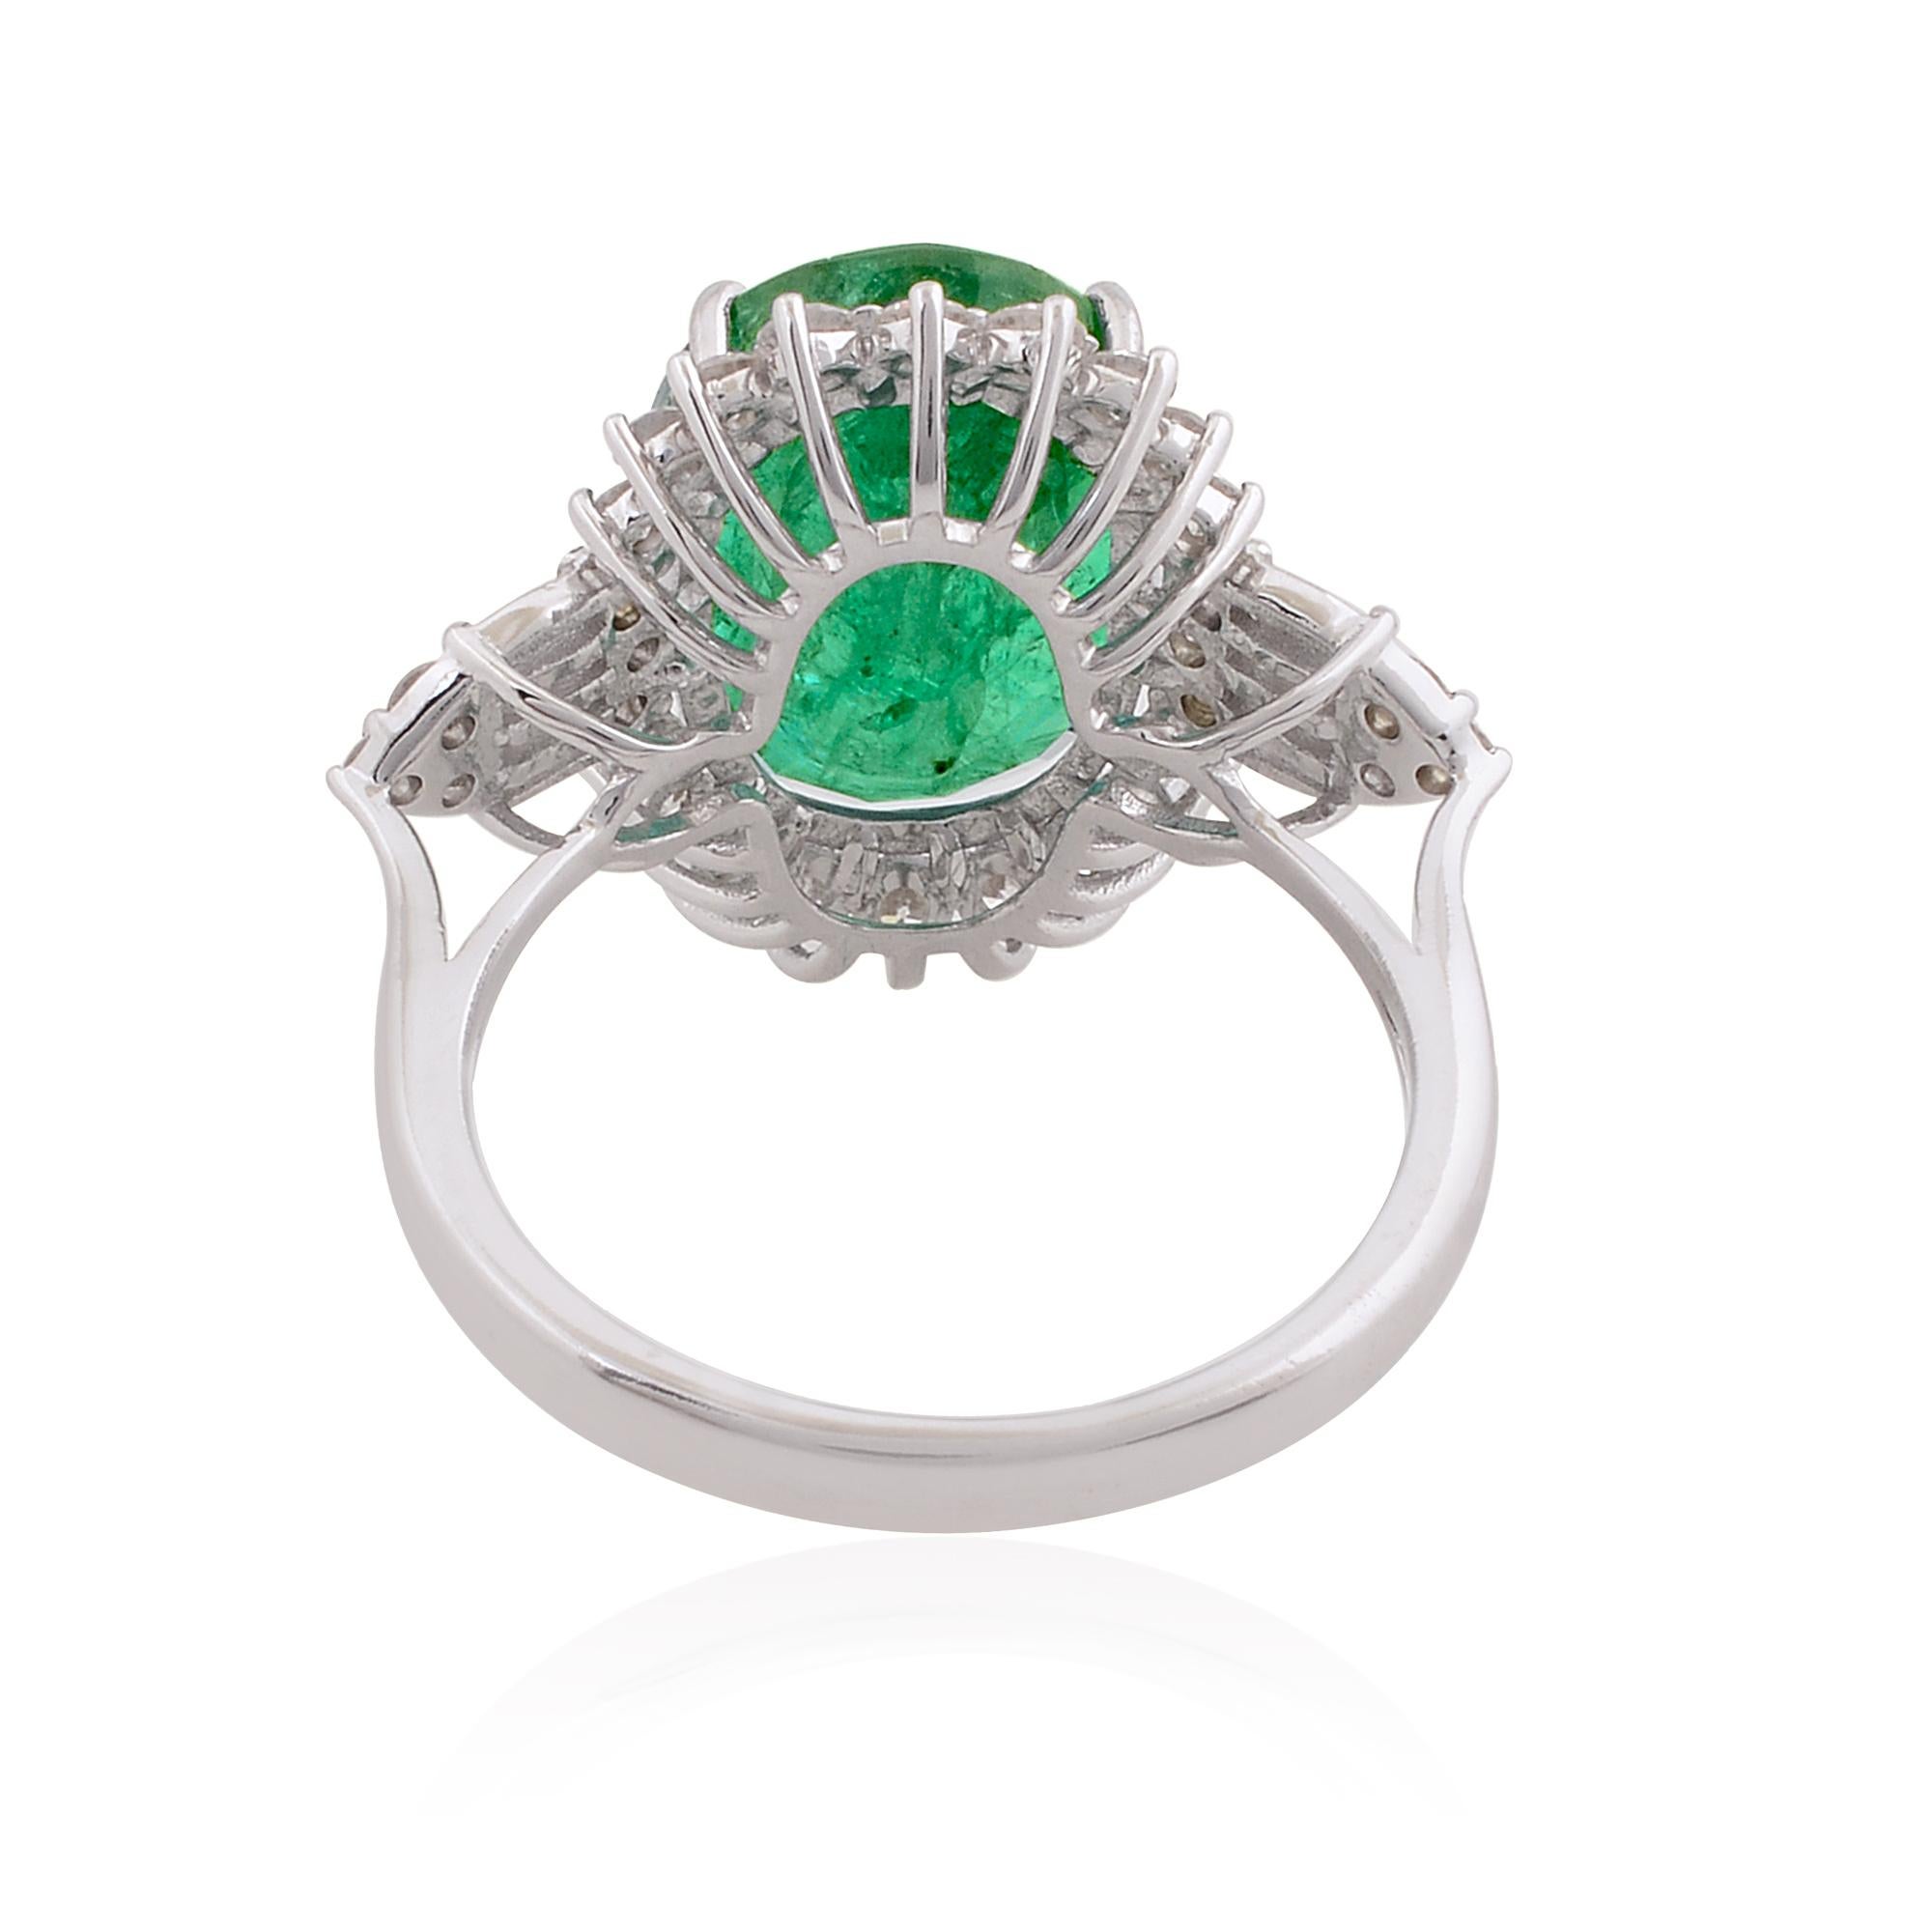 Oval Cut Oval Shape Natural Emerald Gemstone Cocktail Ring Diamond 10 Karat White Gold For Sale